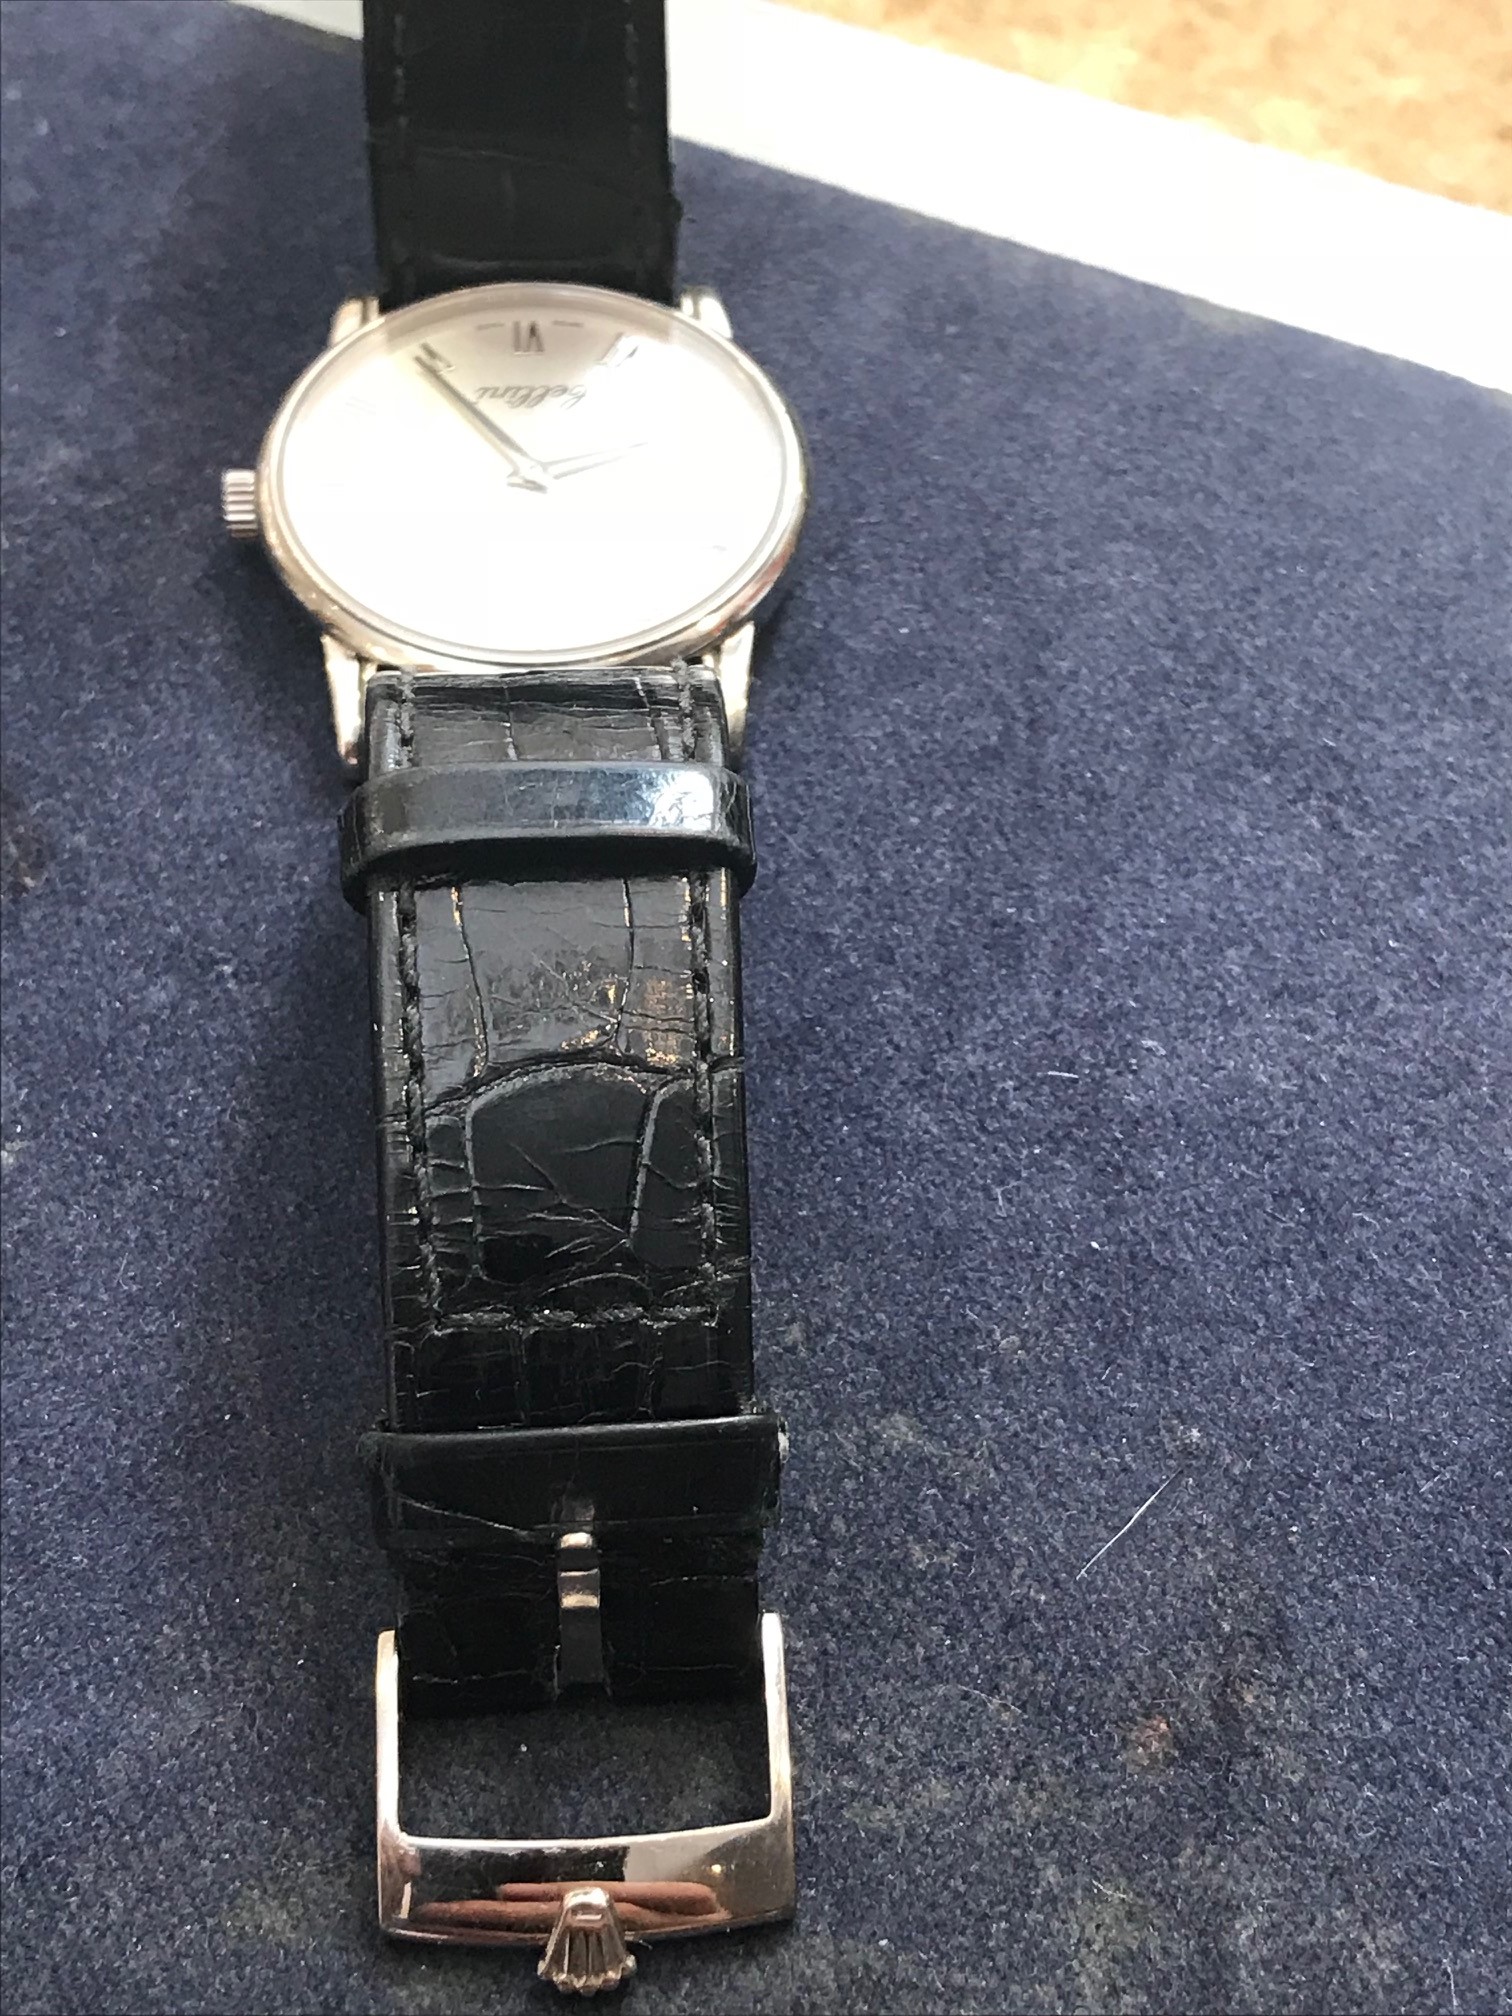 Rolex 5116 Cellini White gold 18kt, Original Rolex Strap and buckle . Good working condition - Image 9 of 9